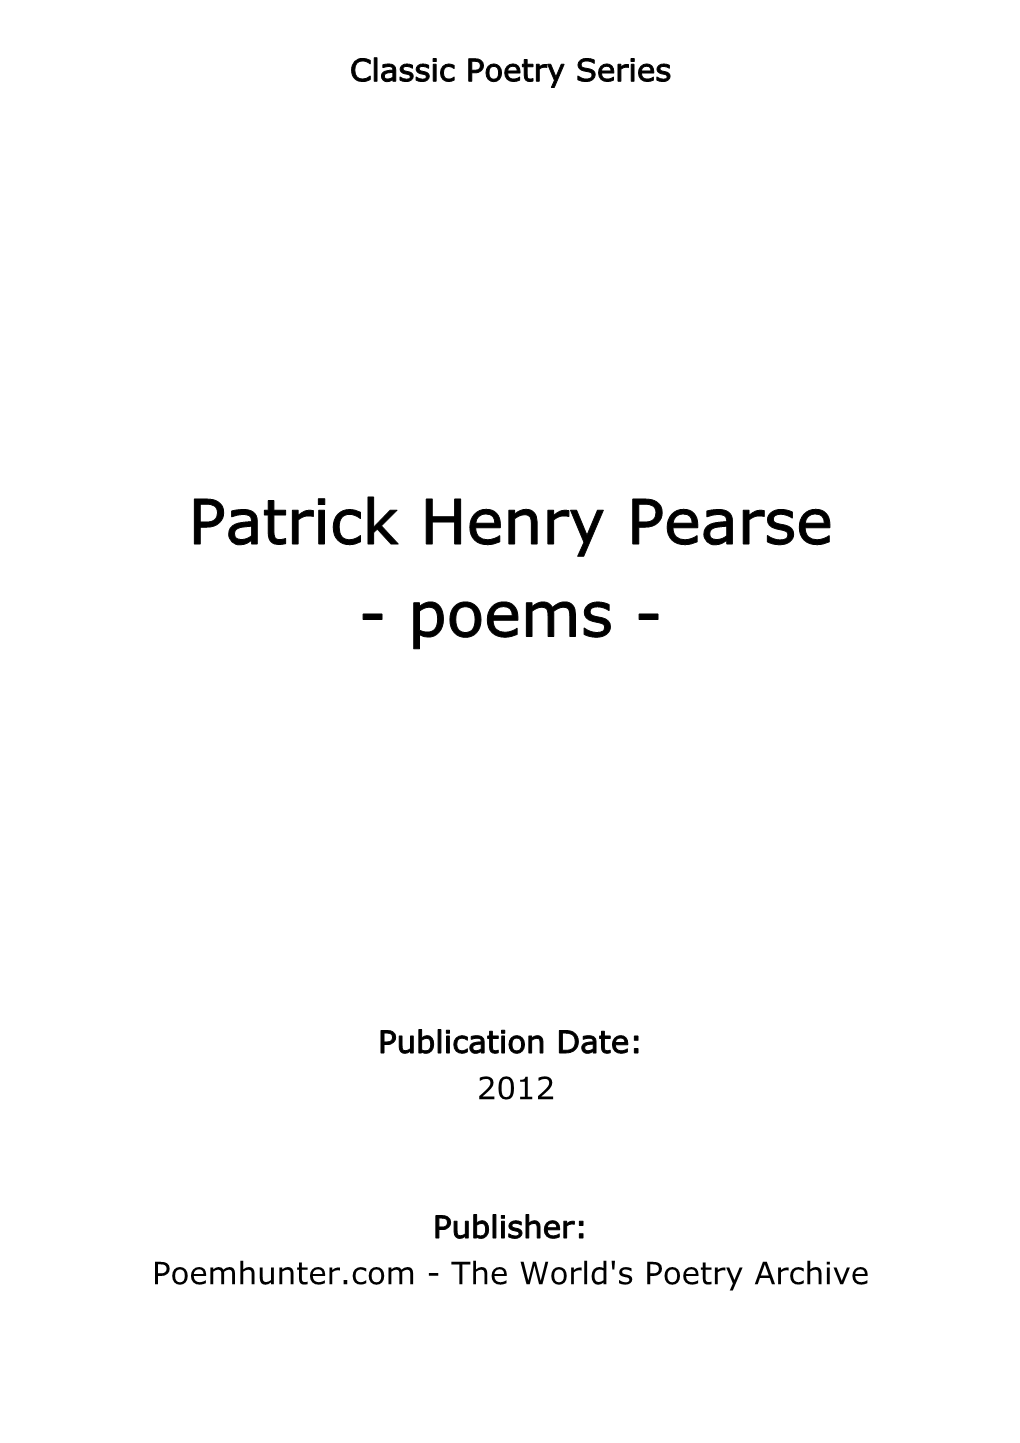 Patrick Henry Pearse - Poems